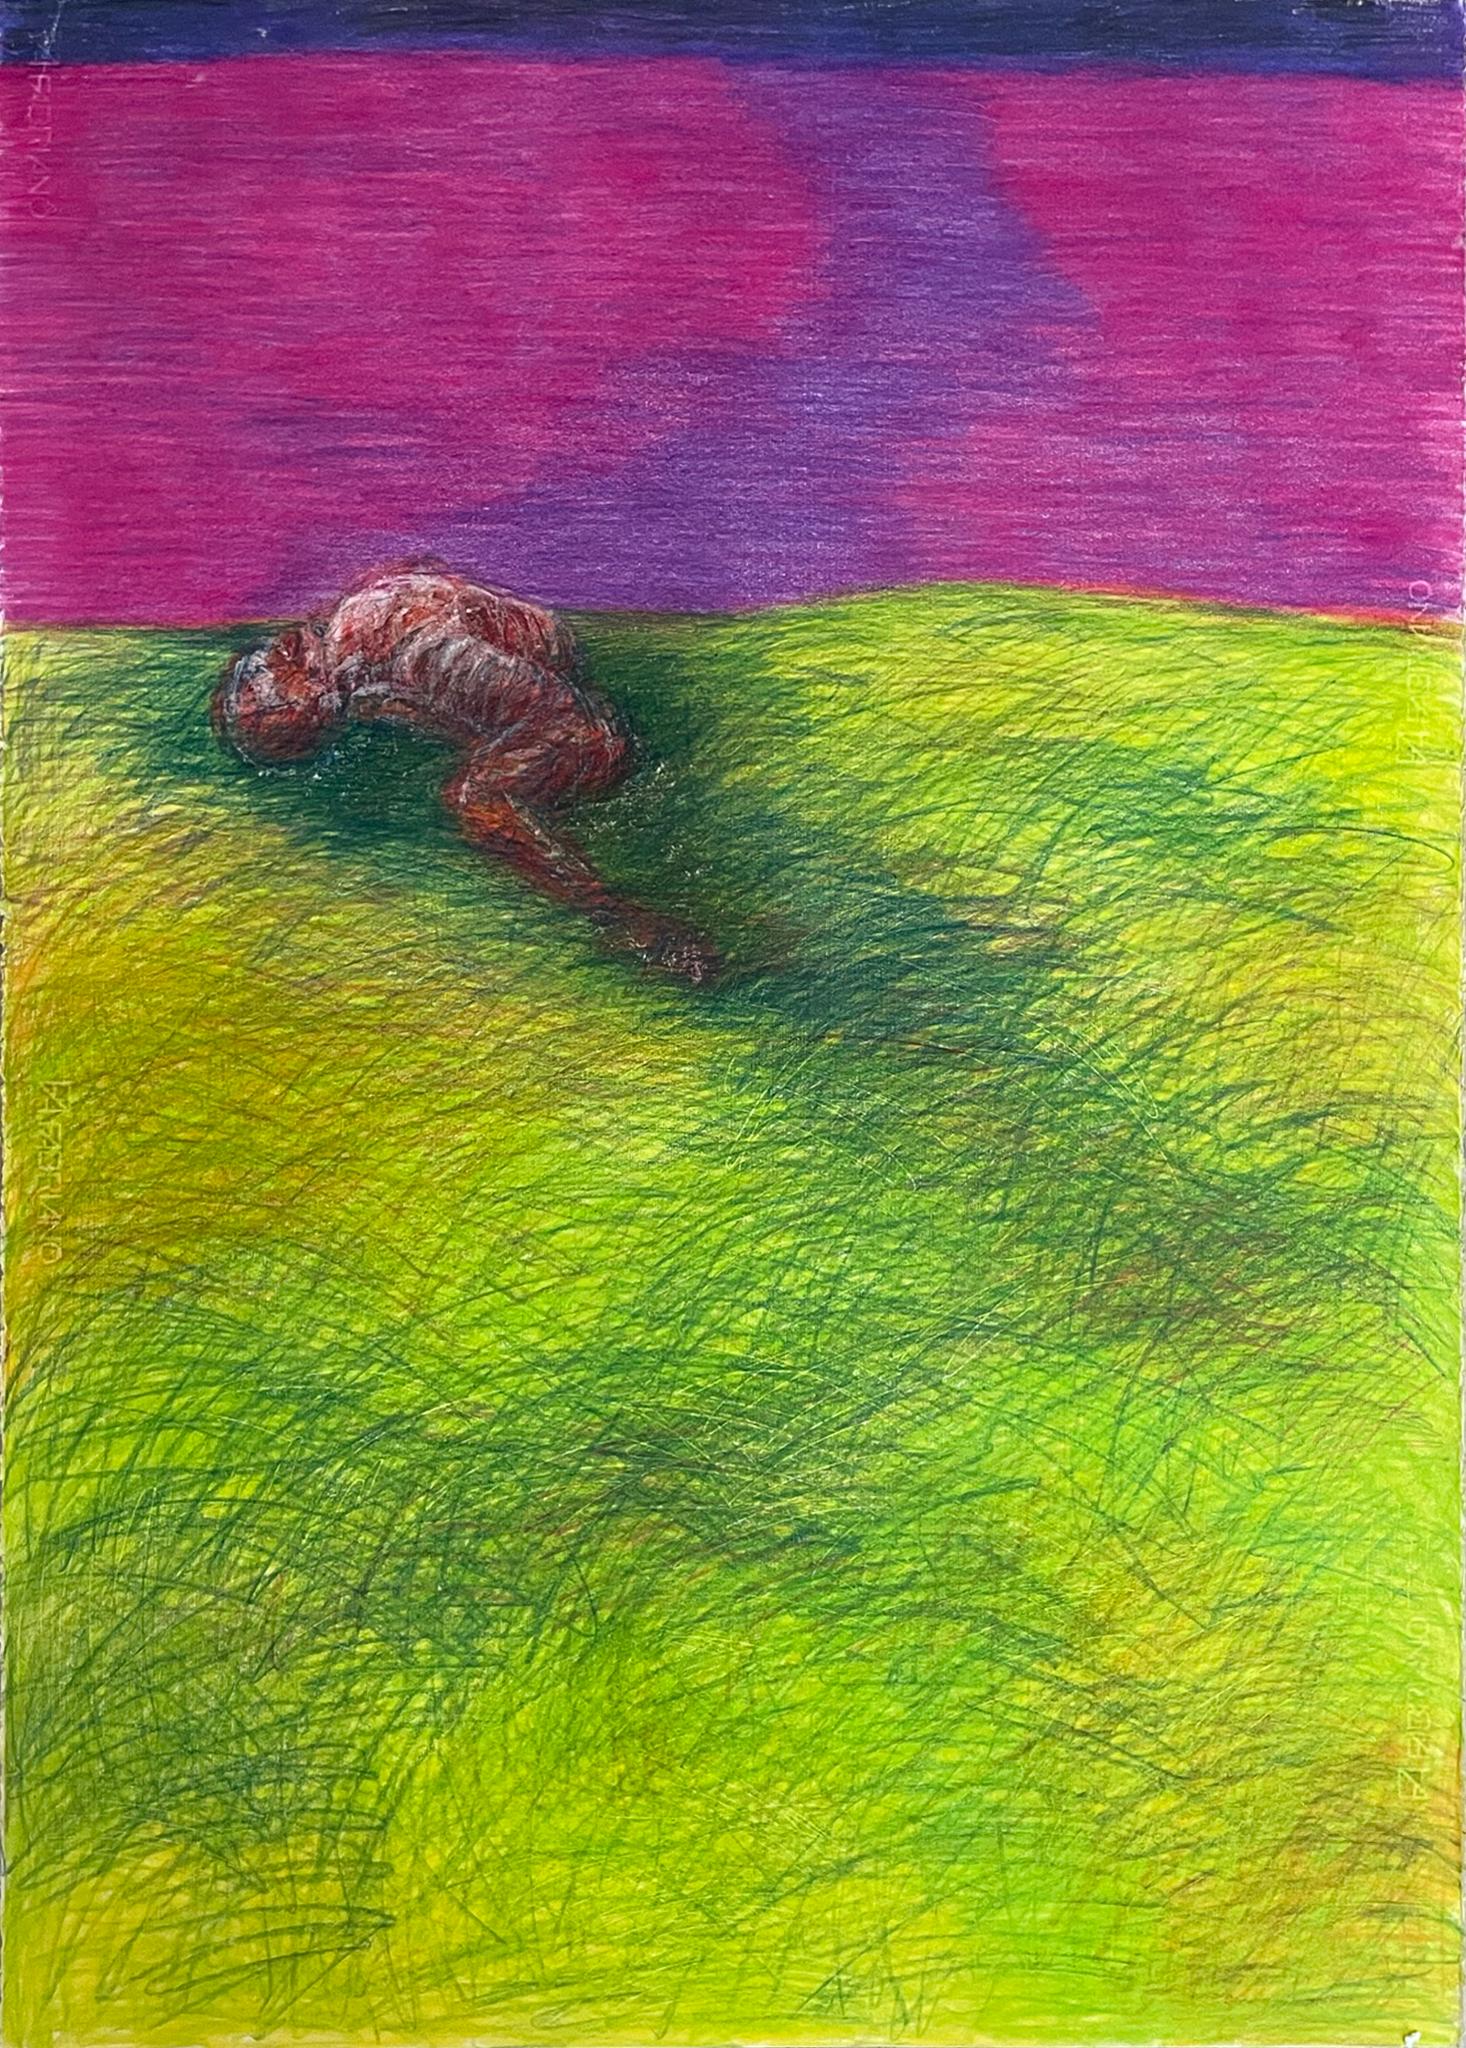 Untitled_Remains. The Dead Body on the Field